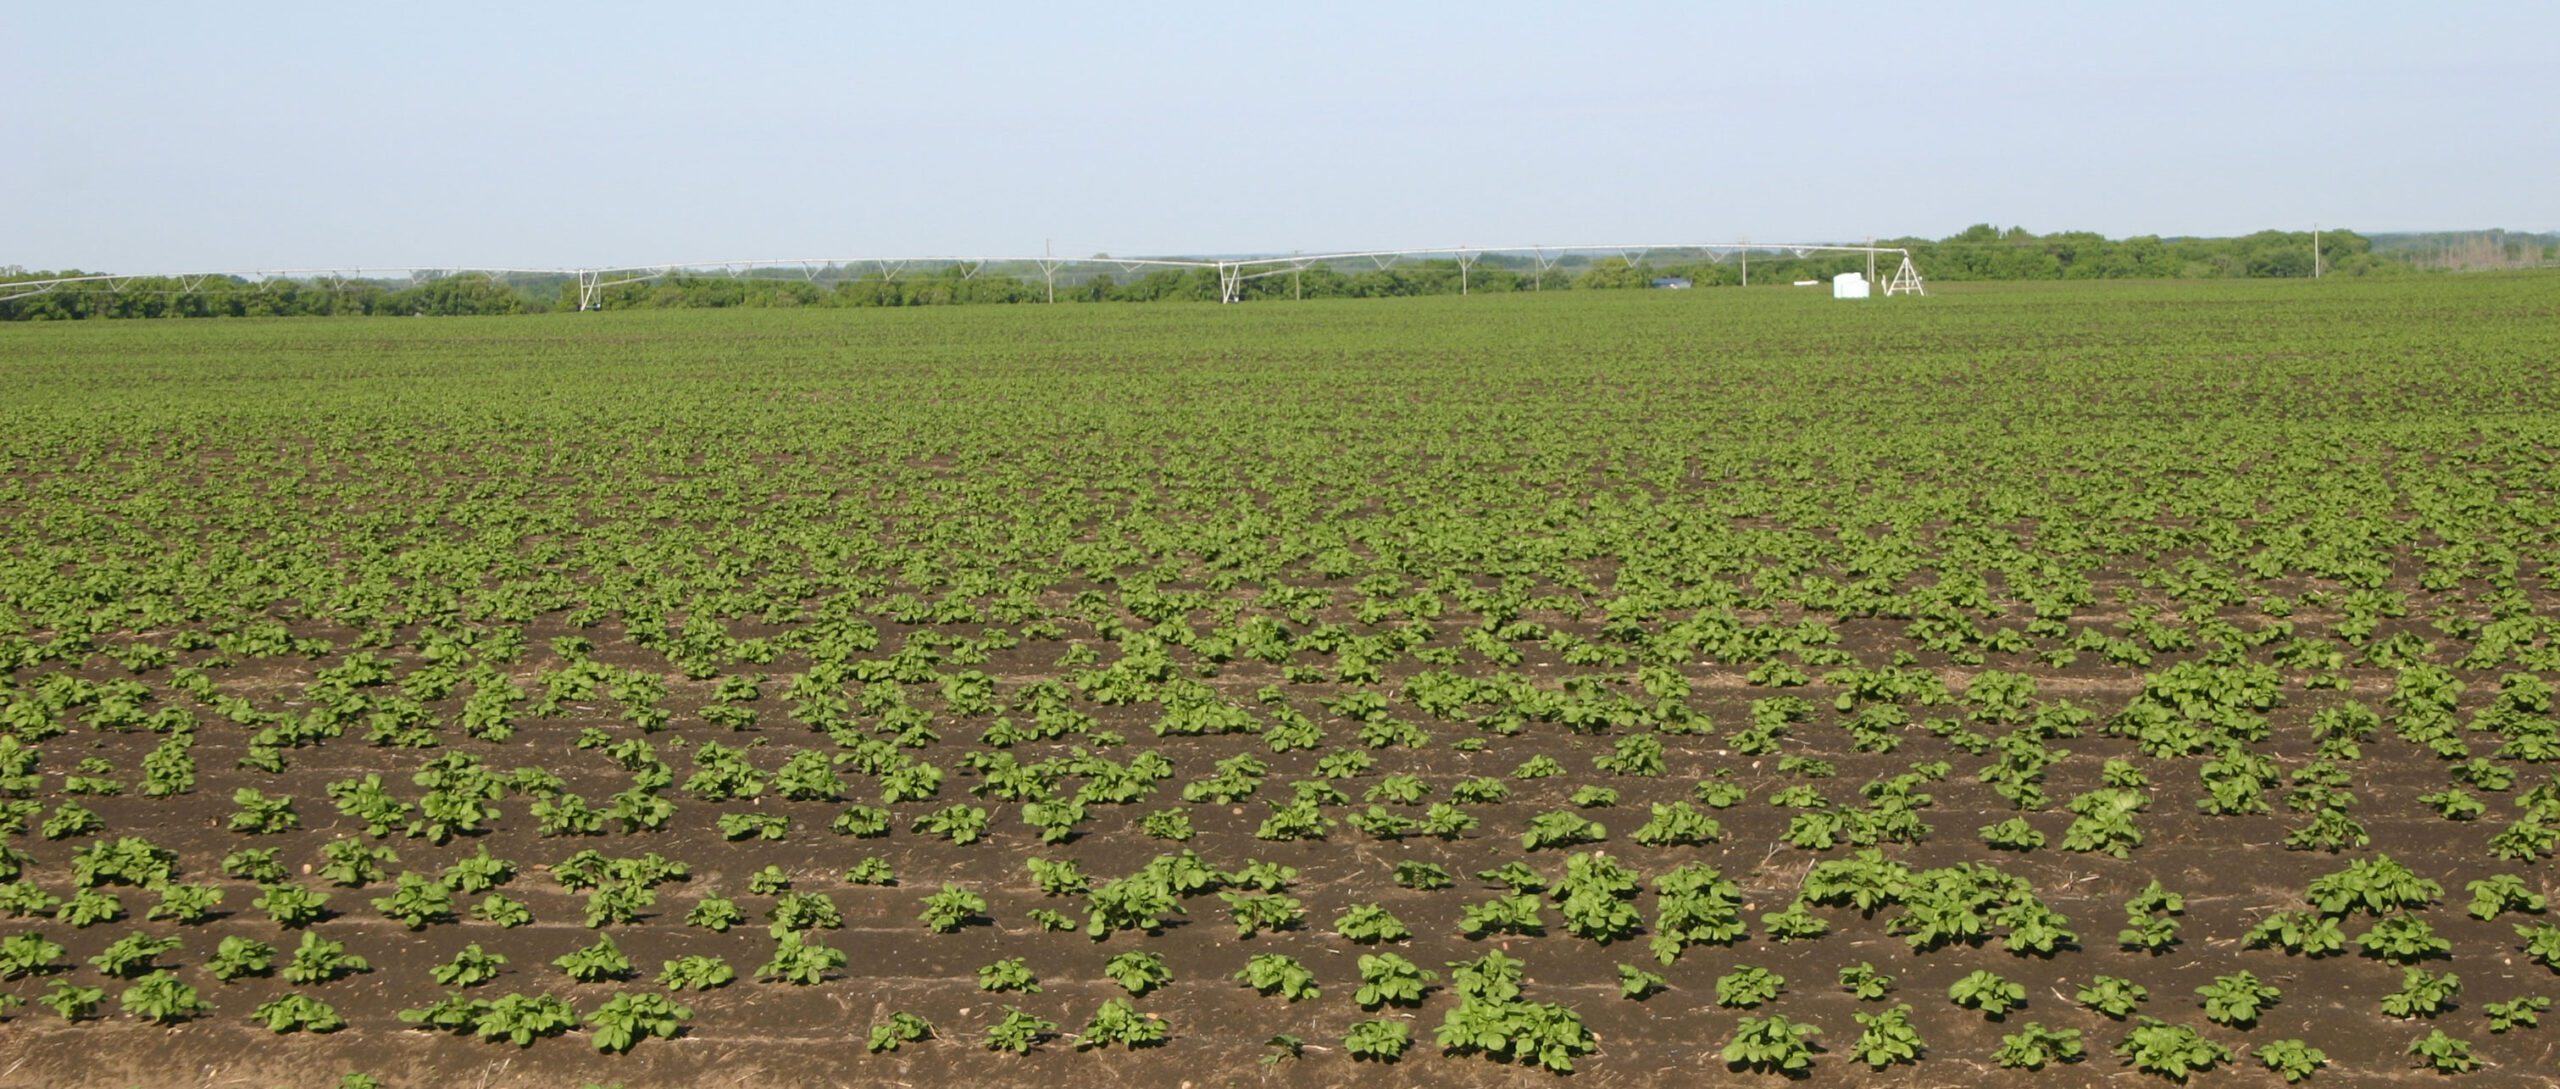 View over an agriculture field with rows of low-growing green plants.